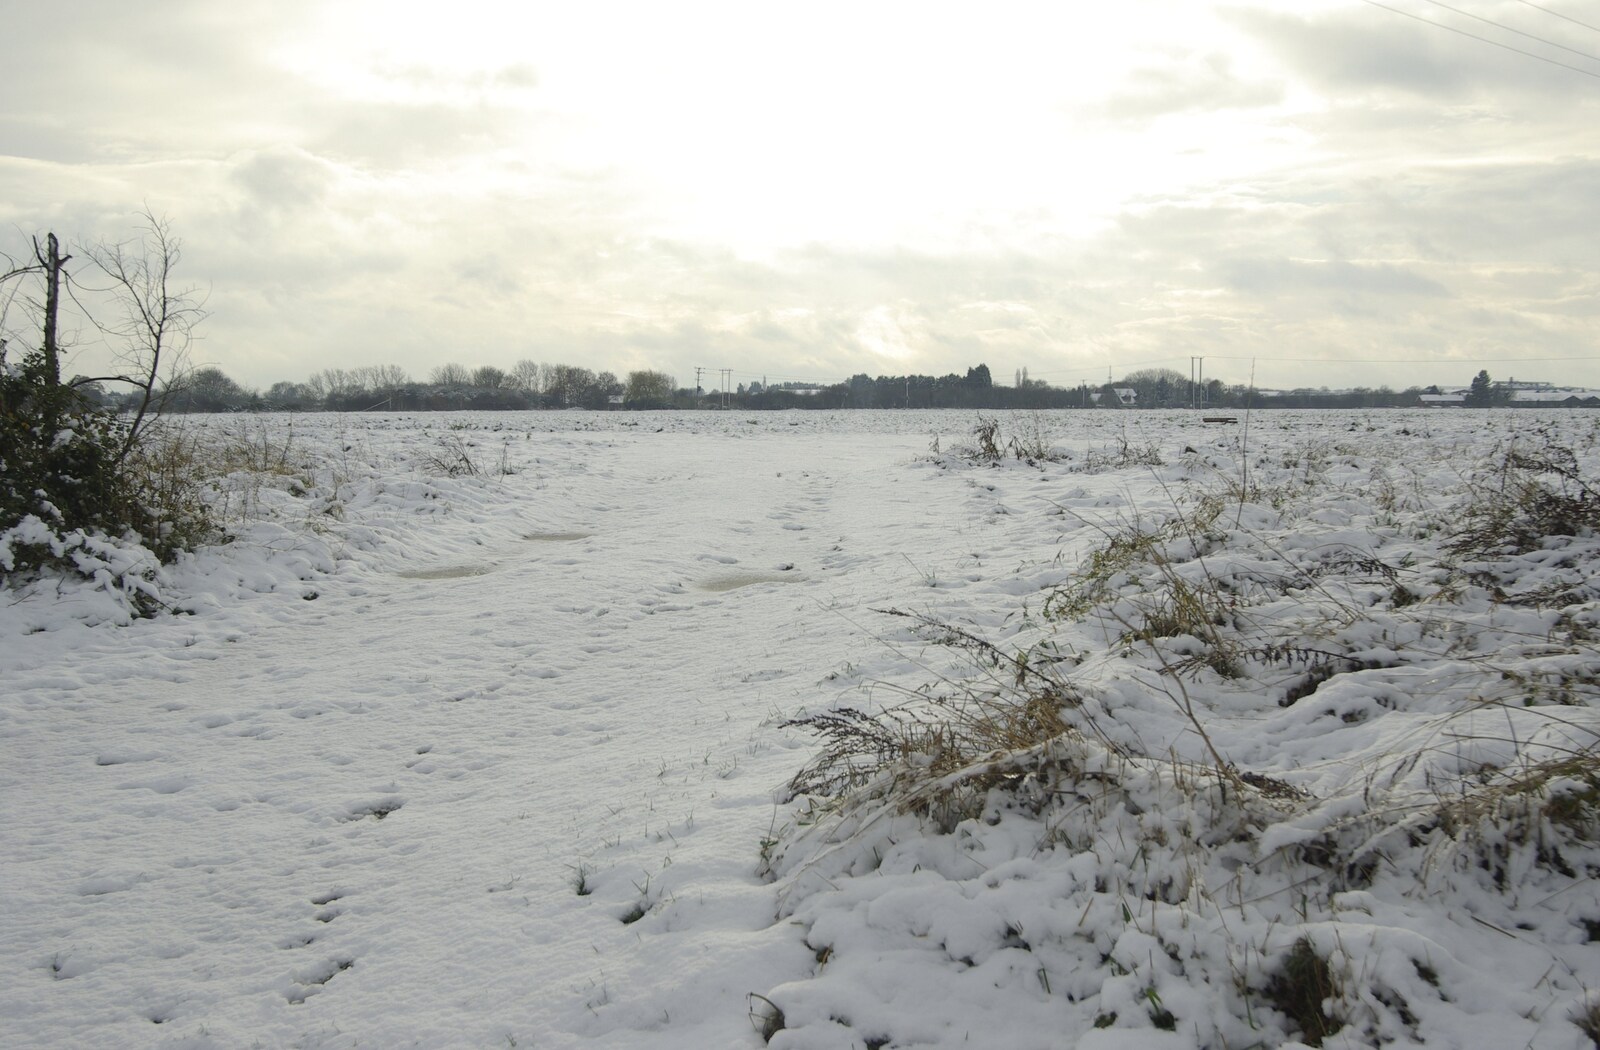 Snow Days, Brome, Suffolk - 22nd November 2008: The snowy 100-acre field